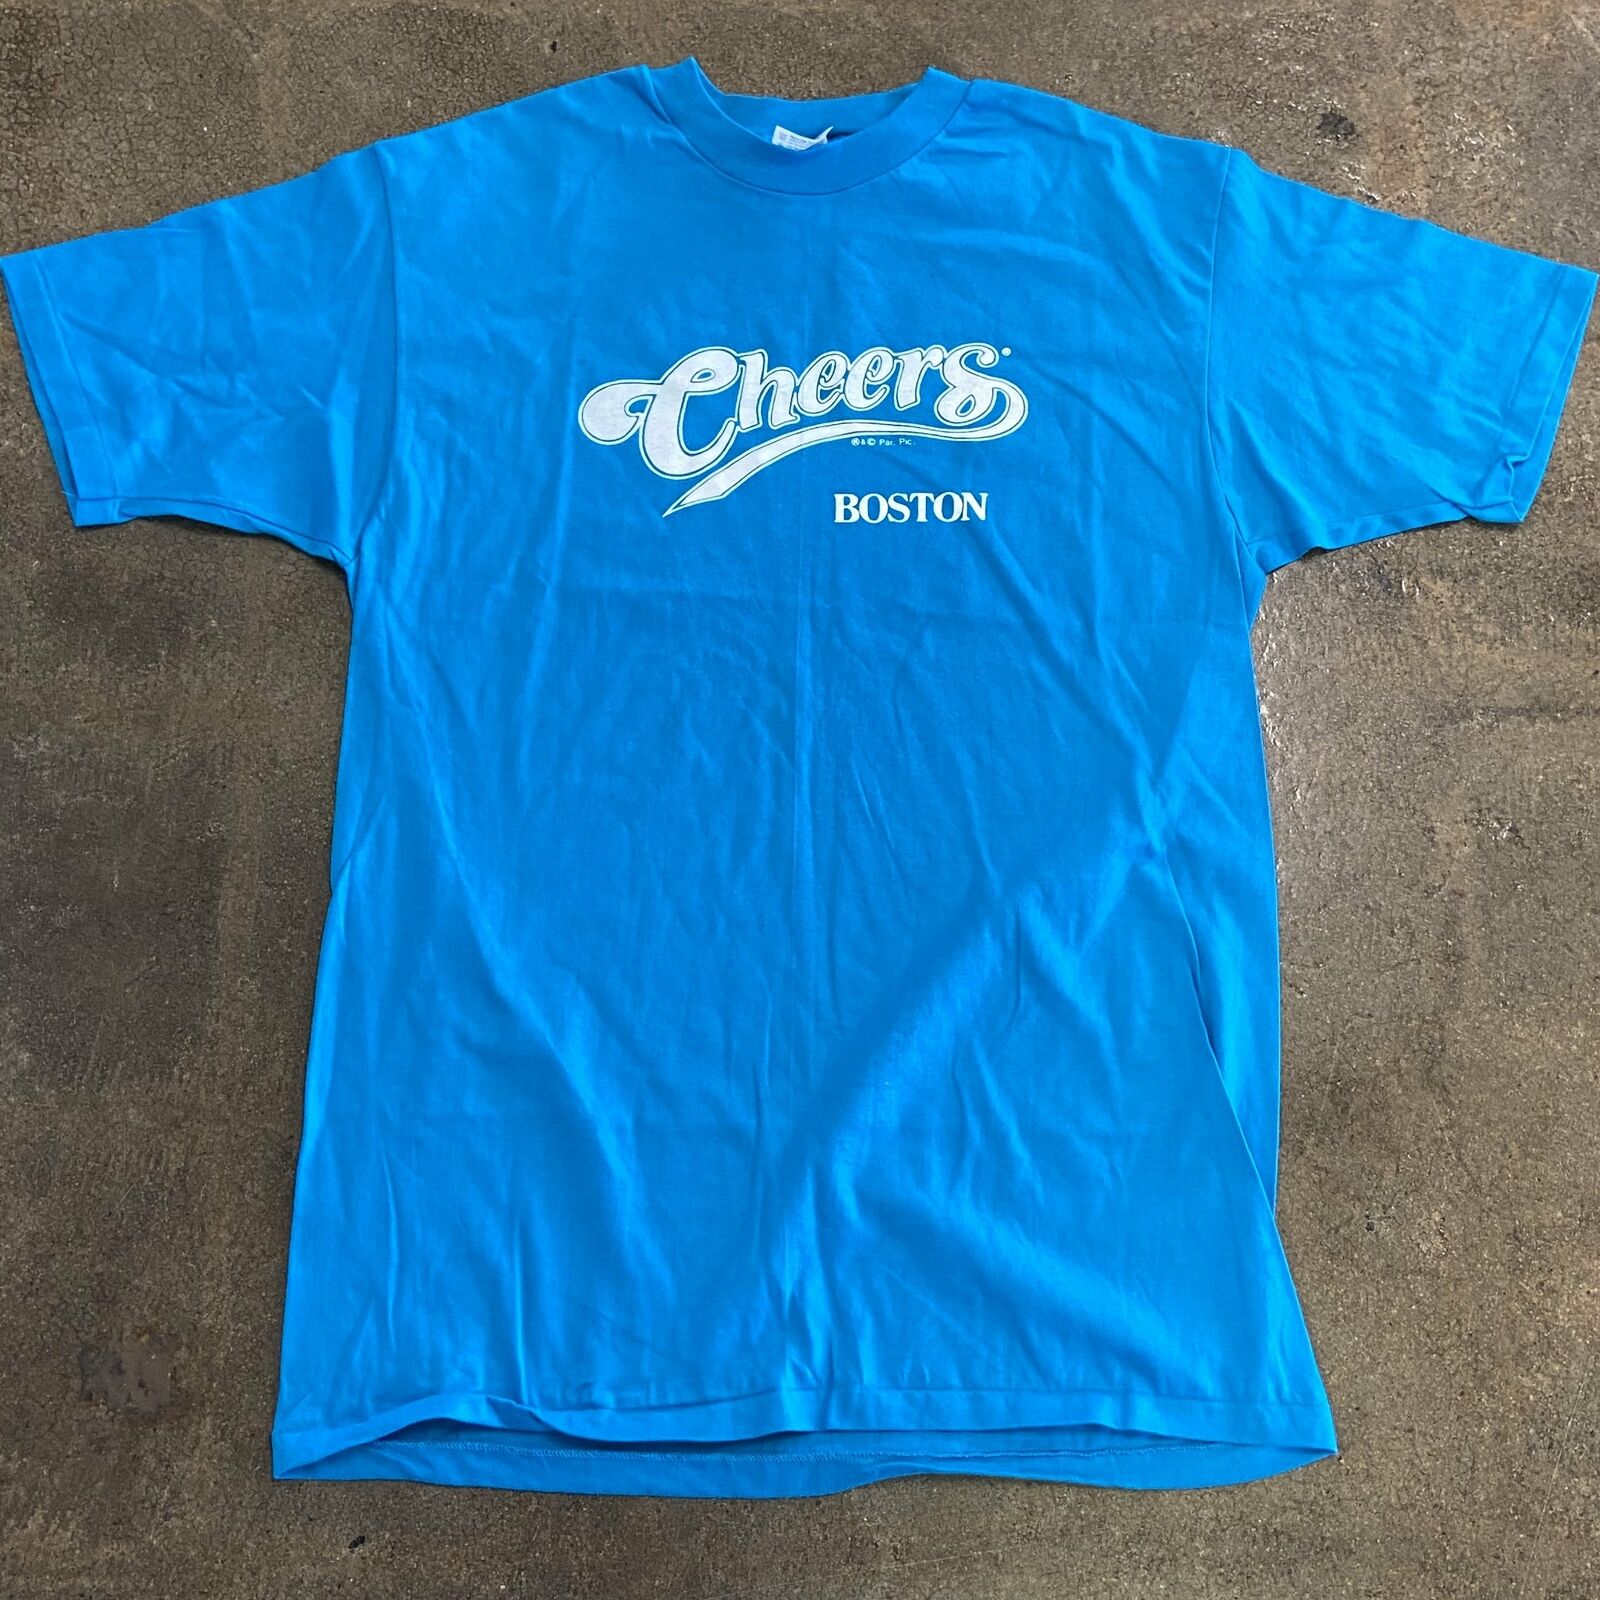 Vintage Hanes Cheers Boston Blue Short Sleeve T-Shirt Adult Size XL Made In USA*